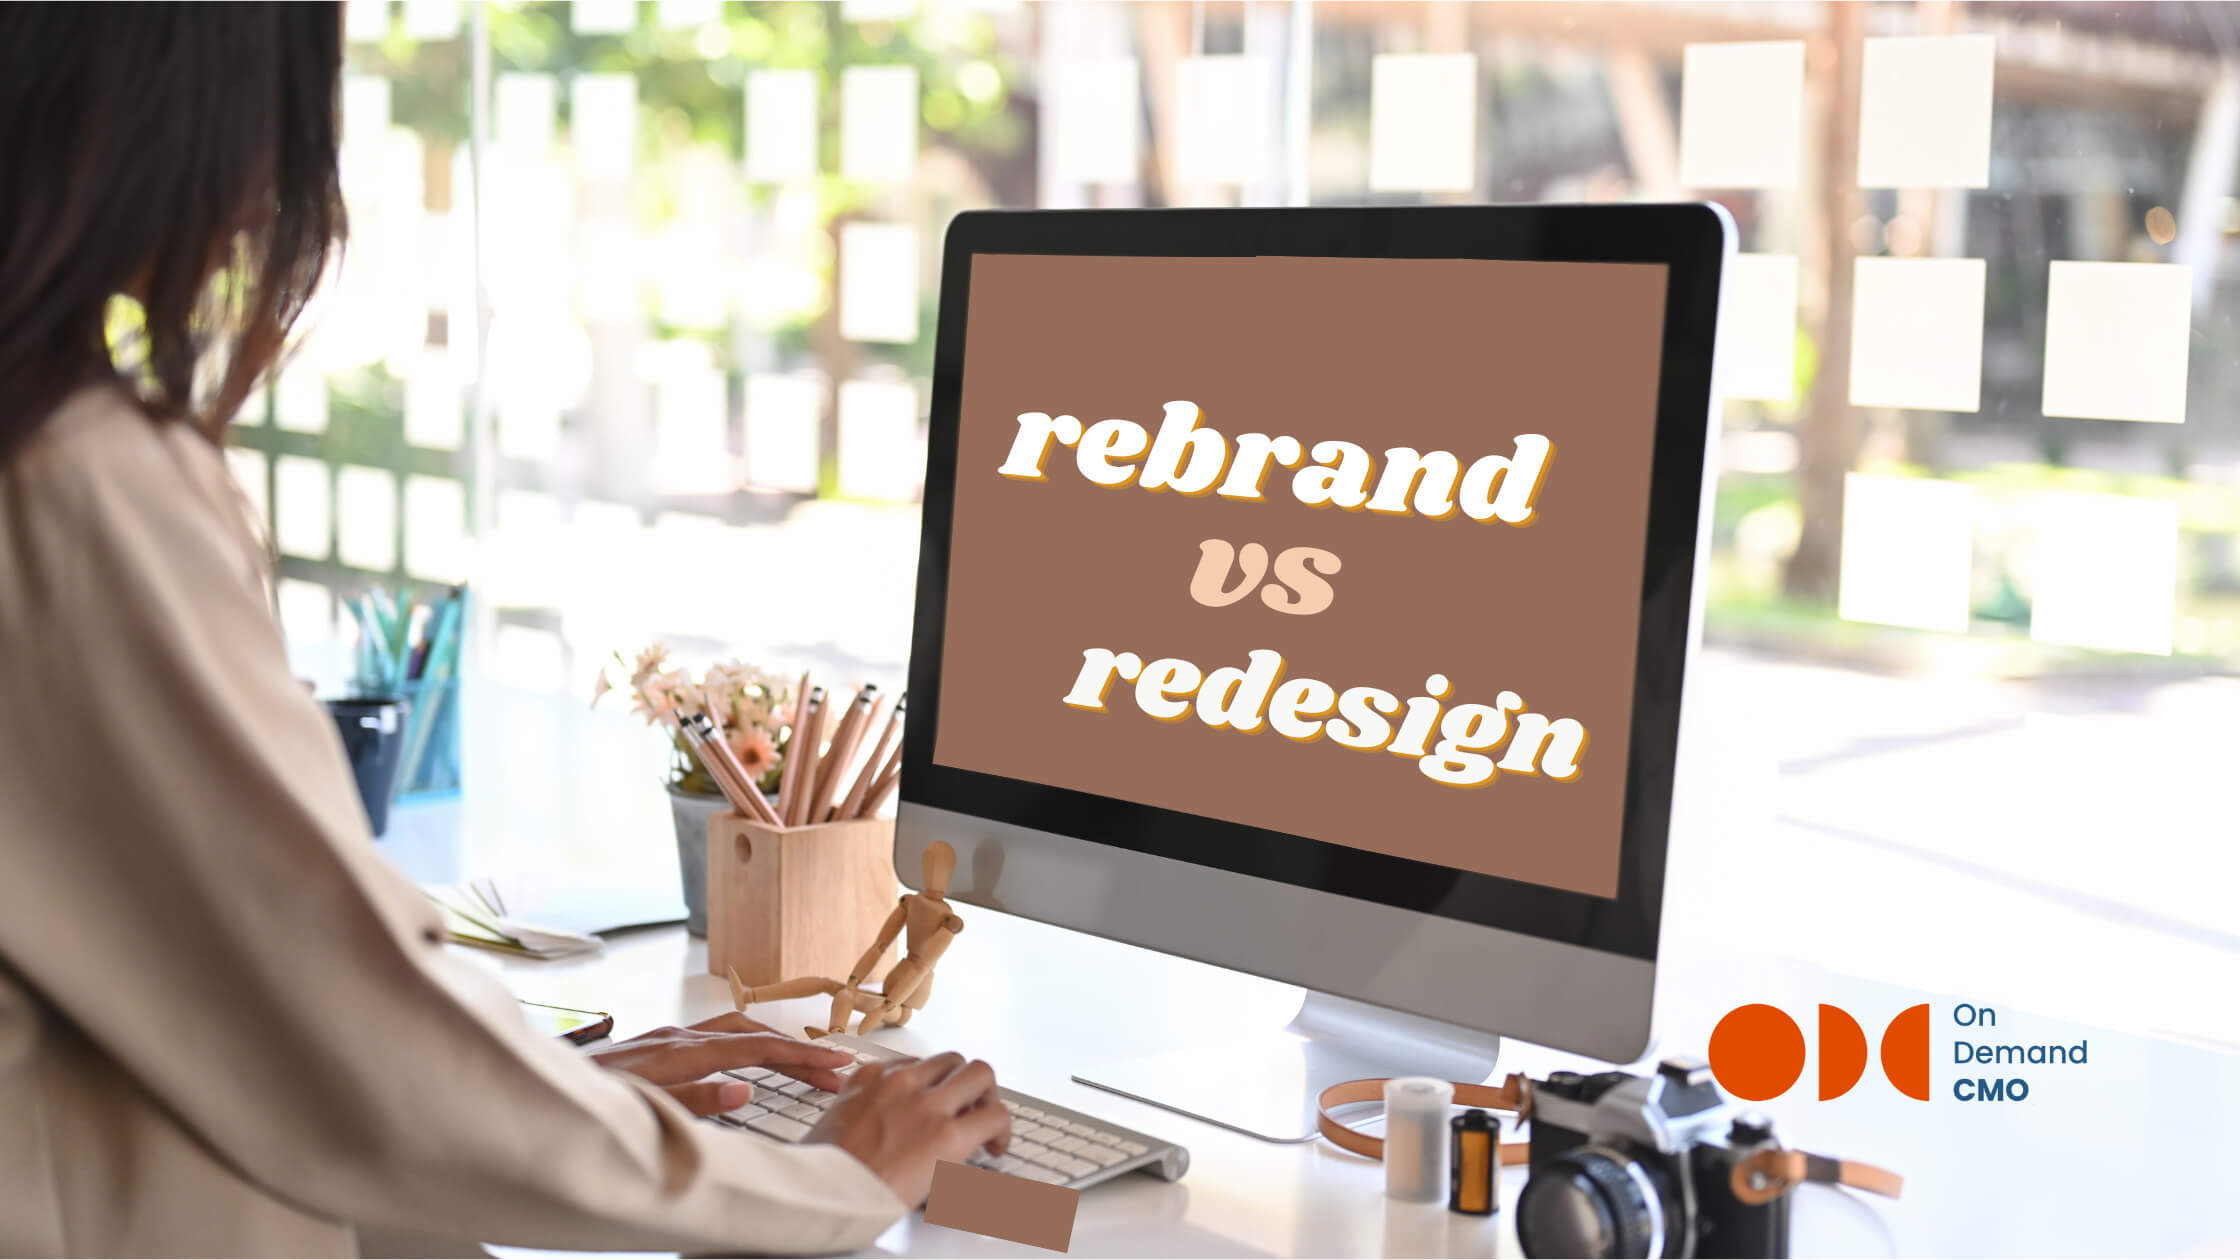 Rebrand vs. Redesign–what’s the difference?